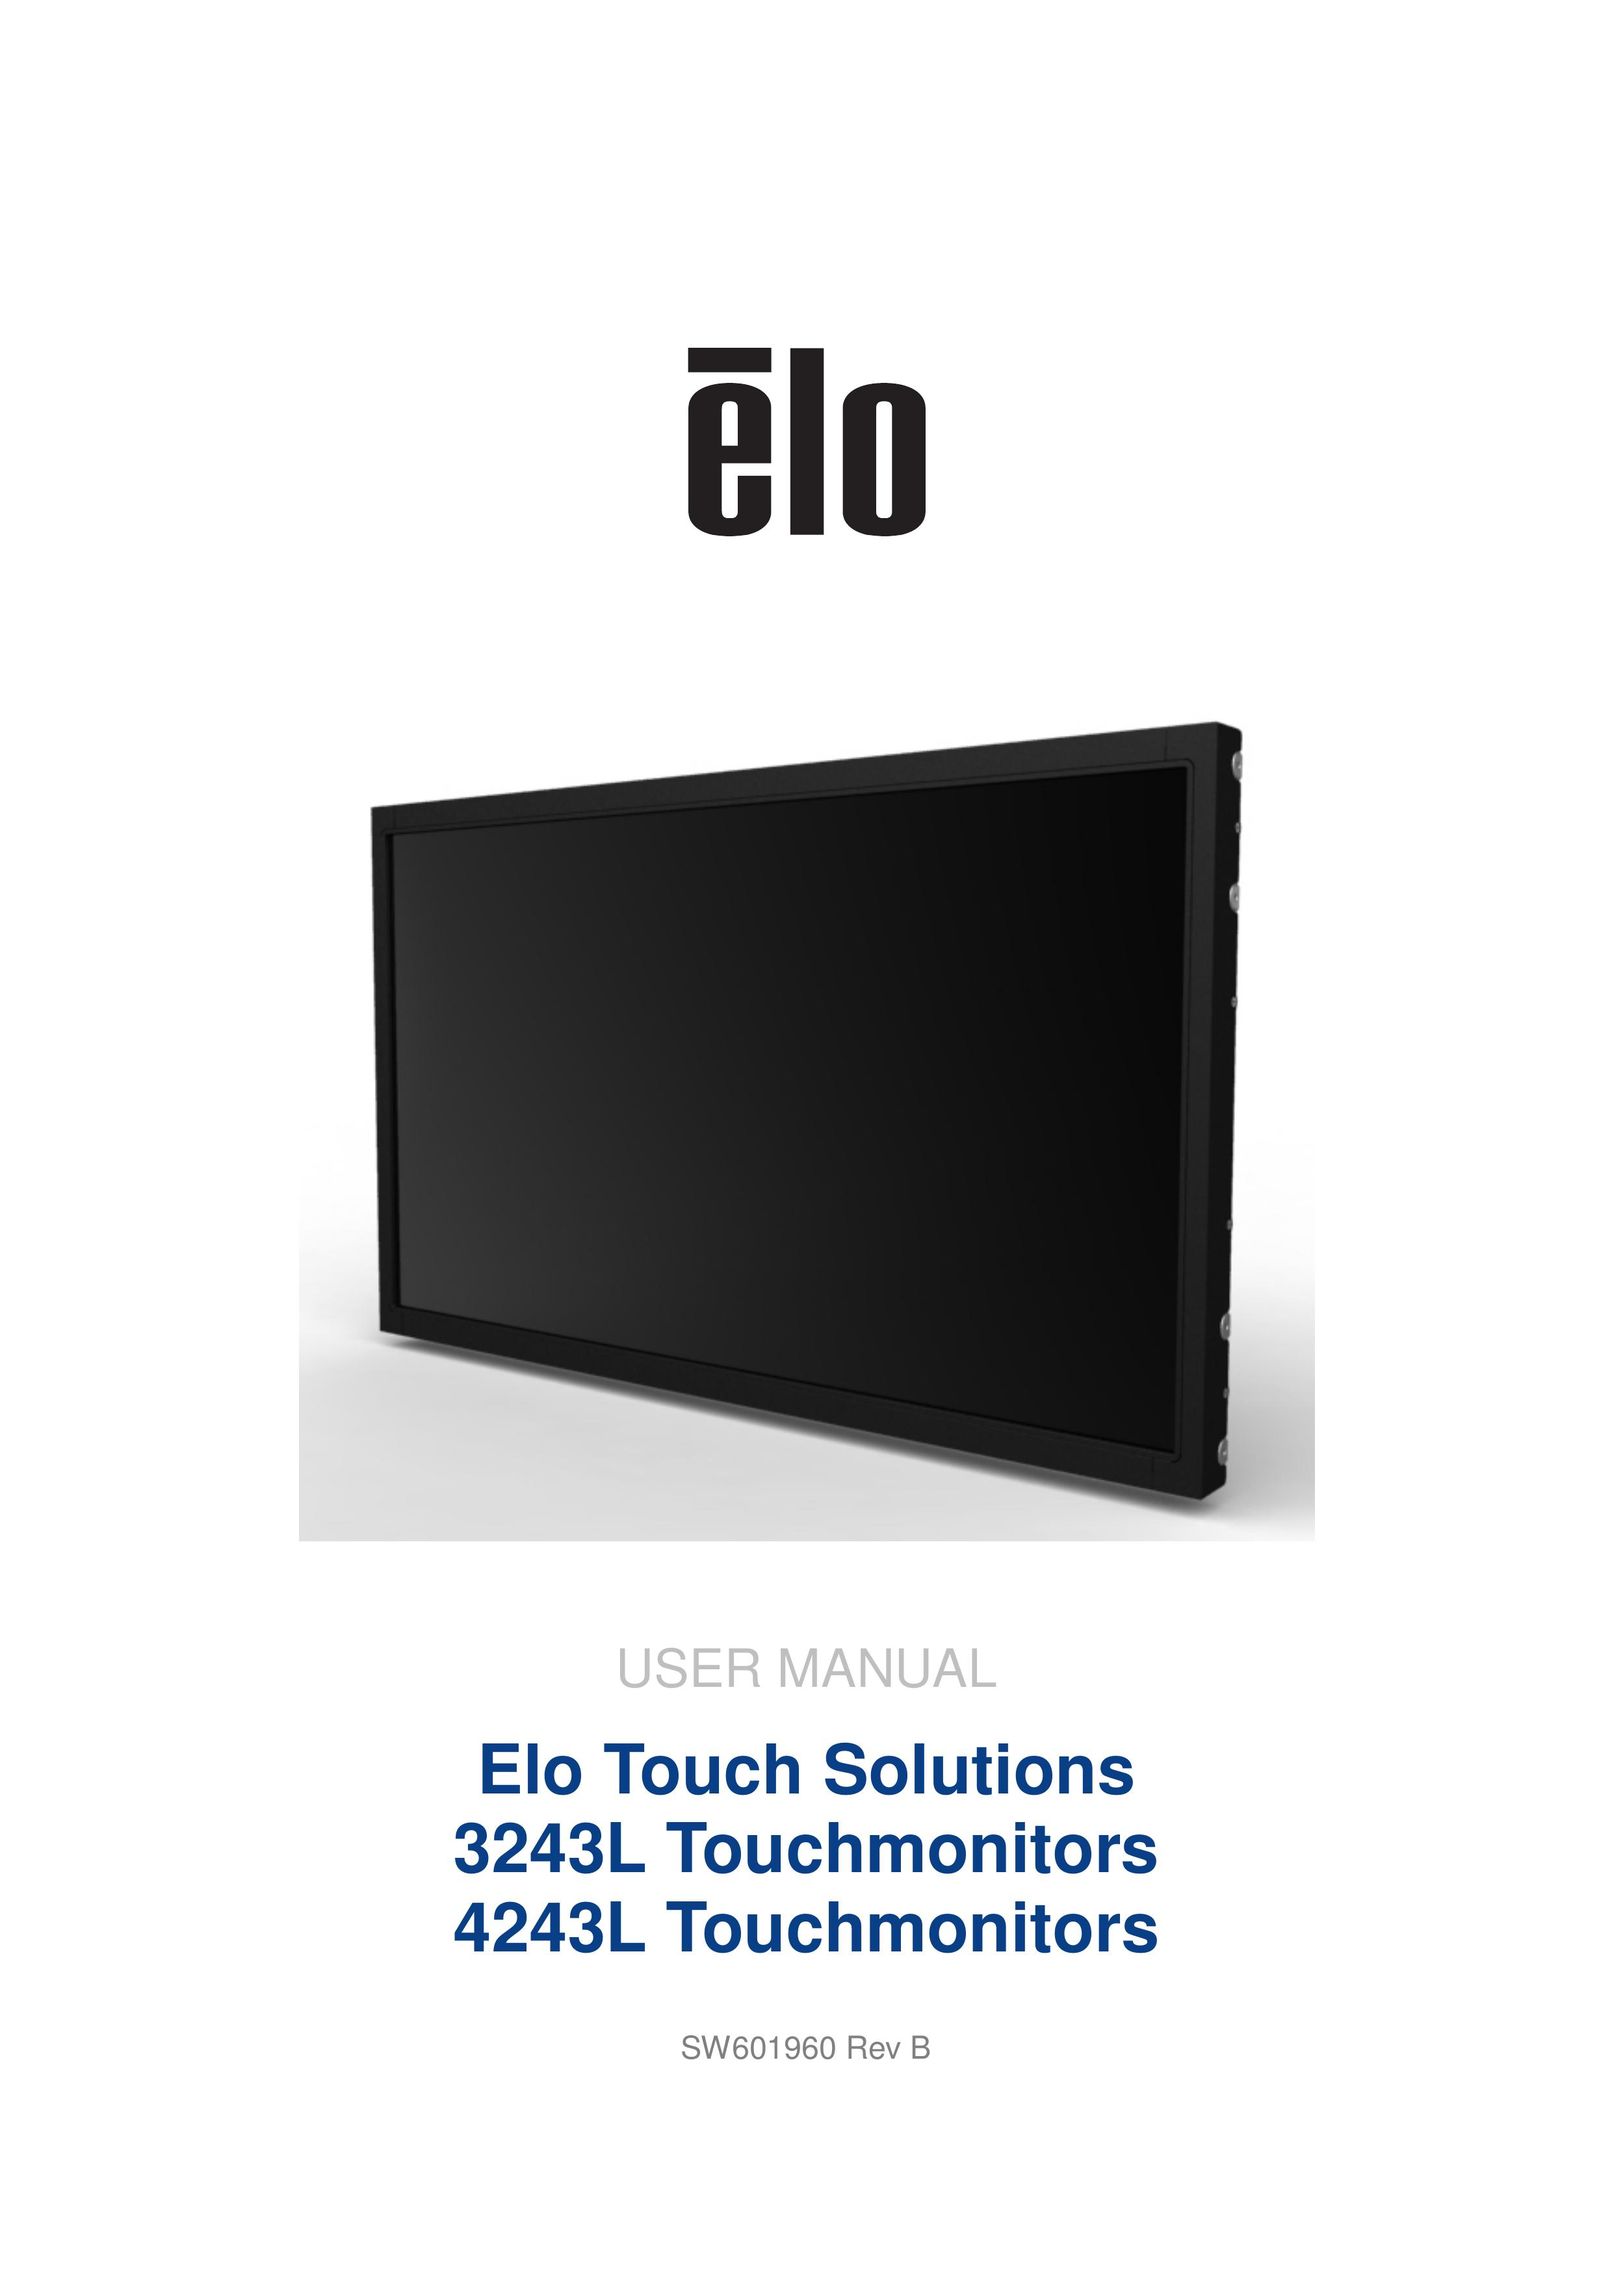 Elo TouchSystems SW601960 Flat Panel Television User Manual